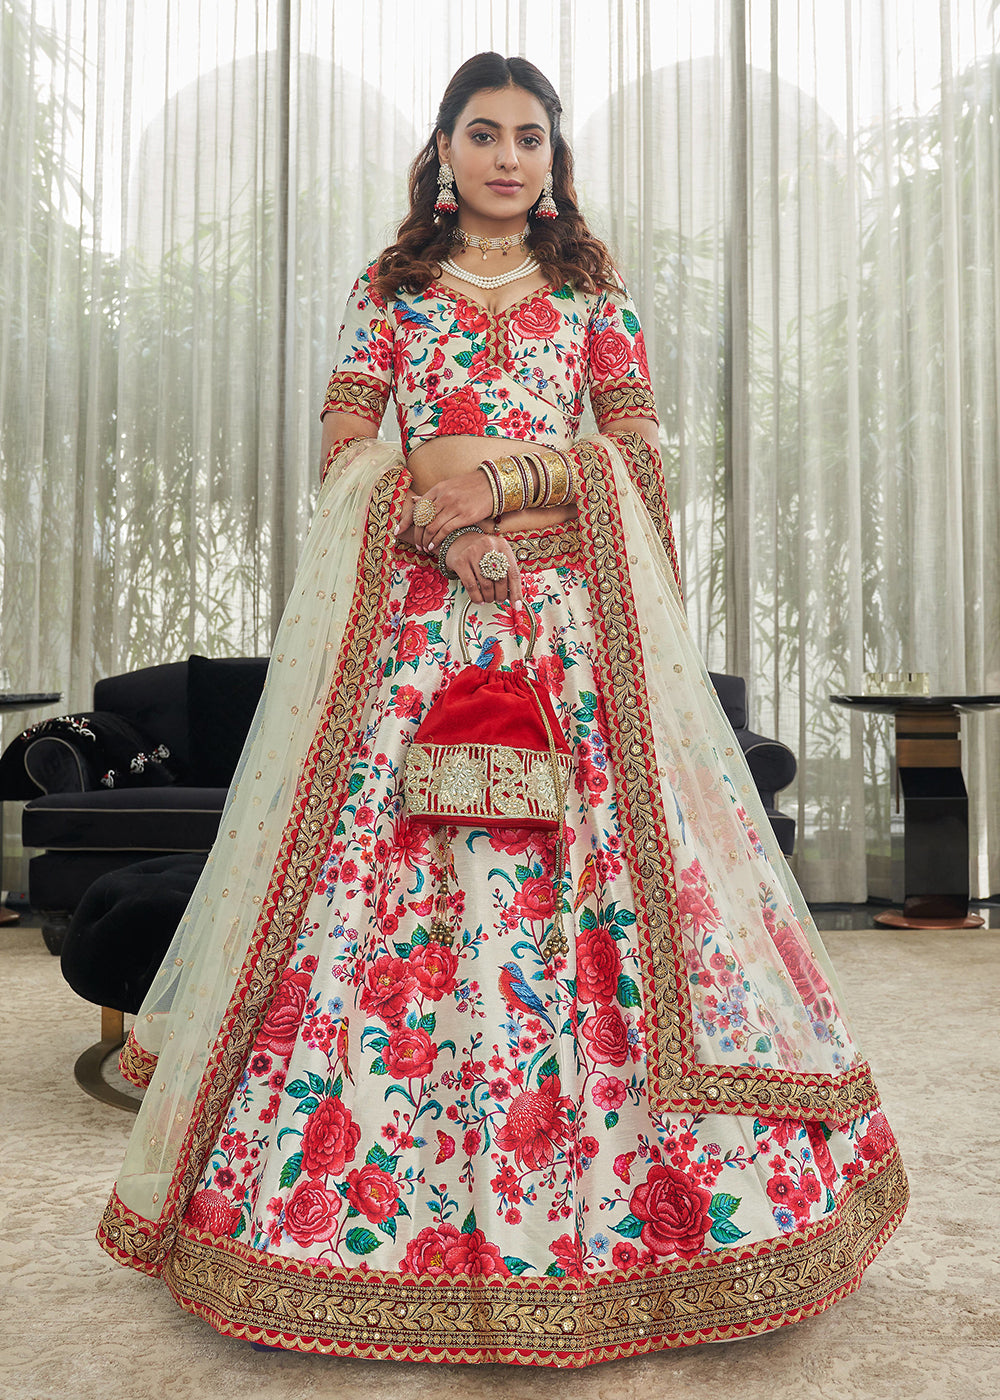 Buy Now Capricious Off-White Art Silk Floral Printed Lehenga Choli Online in USA, UK, Canada & Worldwide at Empress Clothing.